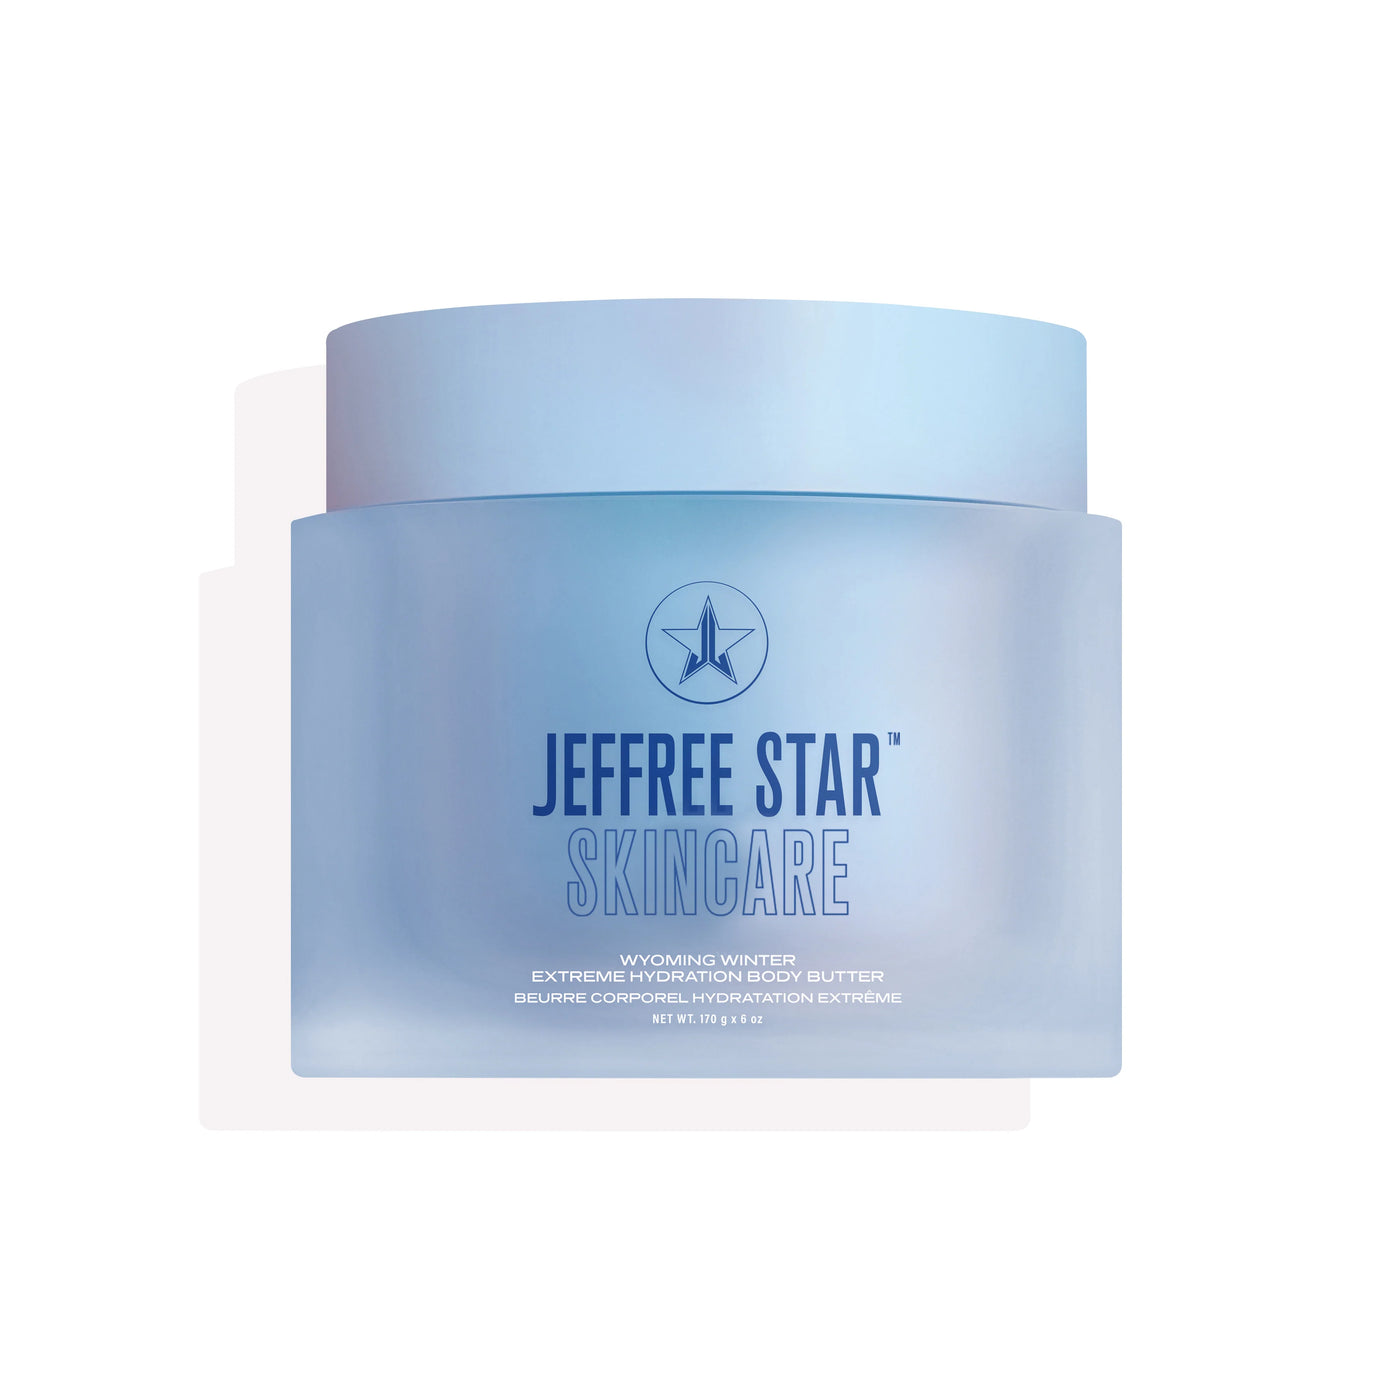 Jeffree Star Cosmetics - Wyoming Winter Extreme Hydration Body Butter